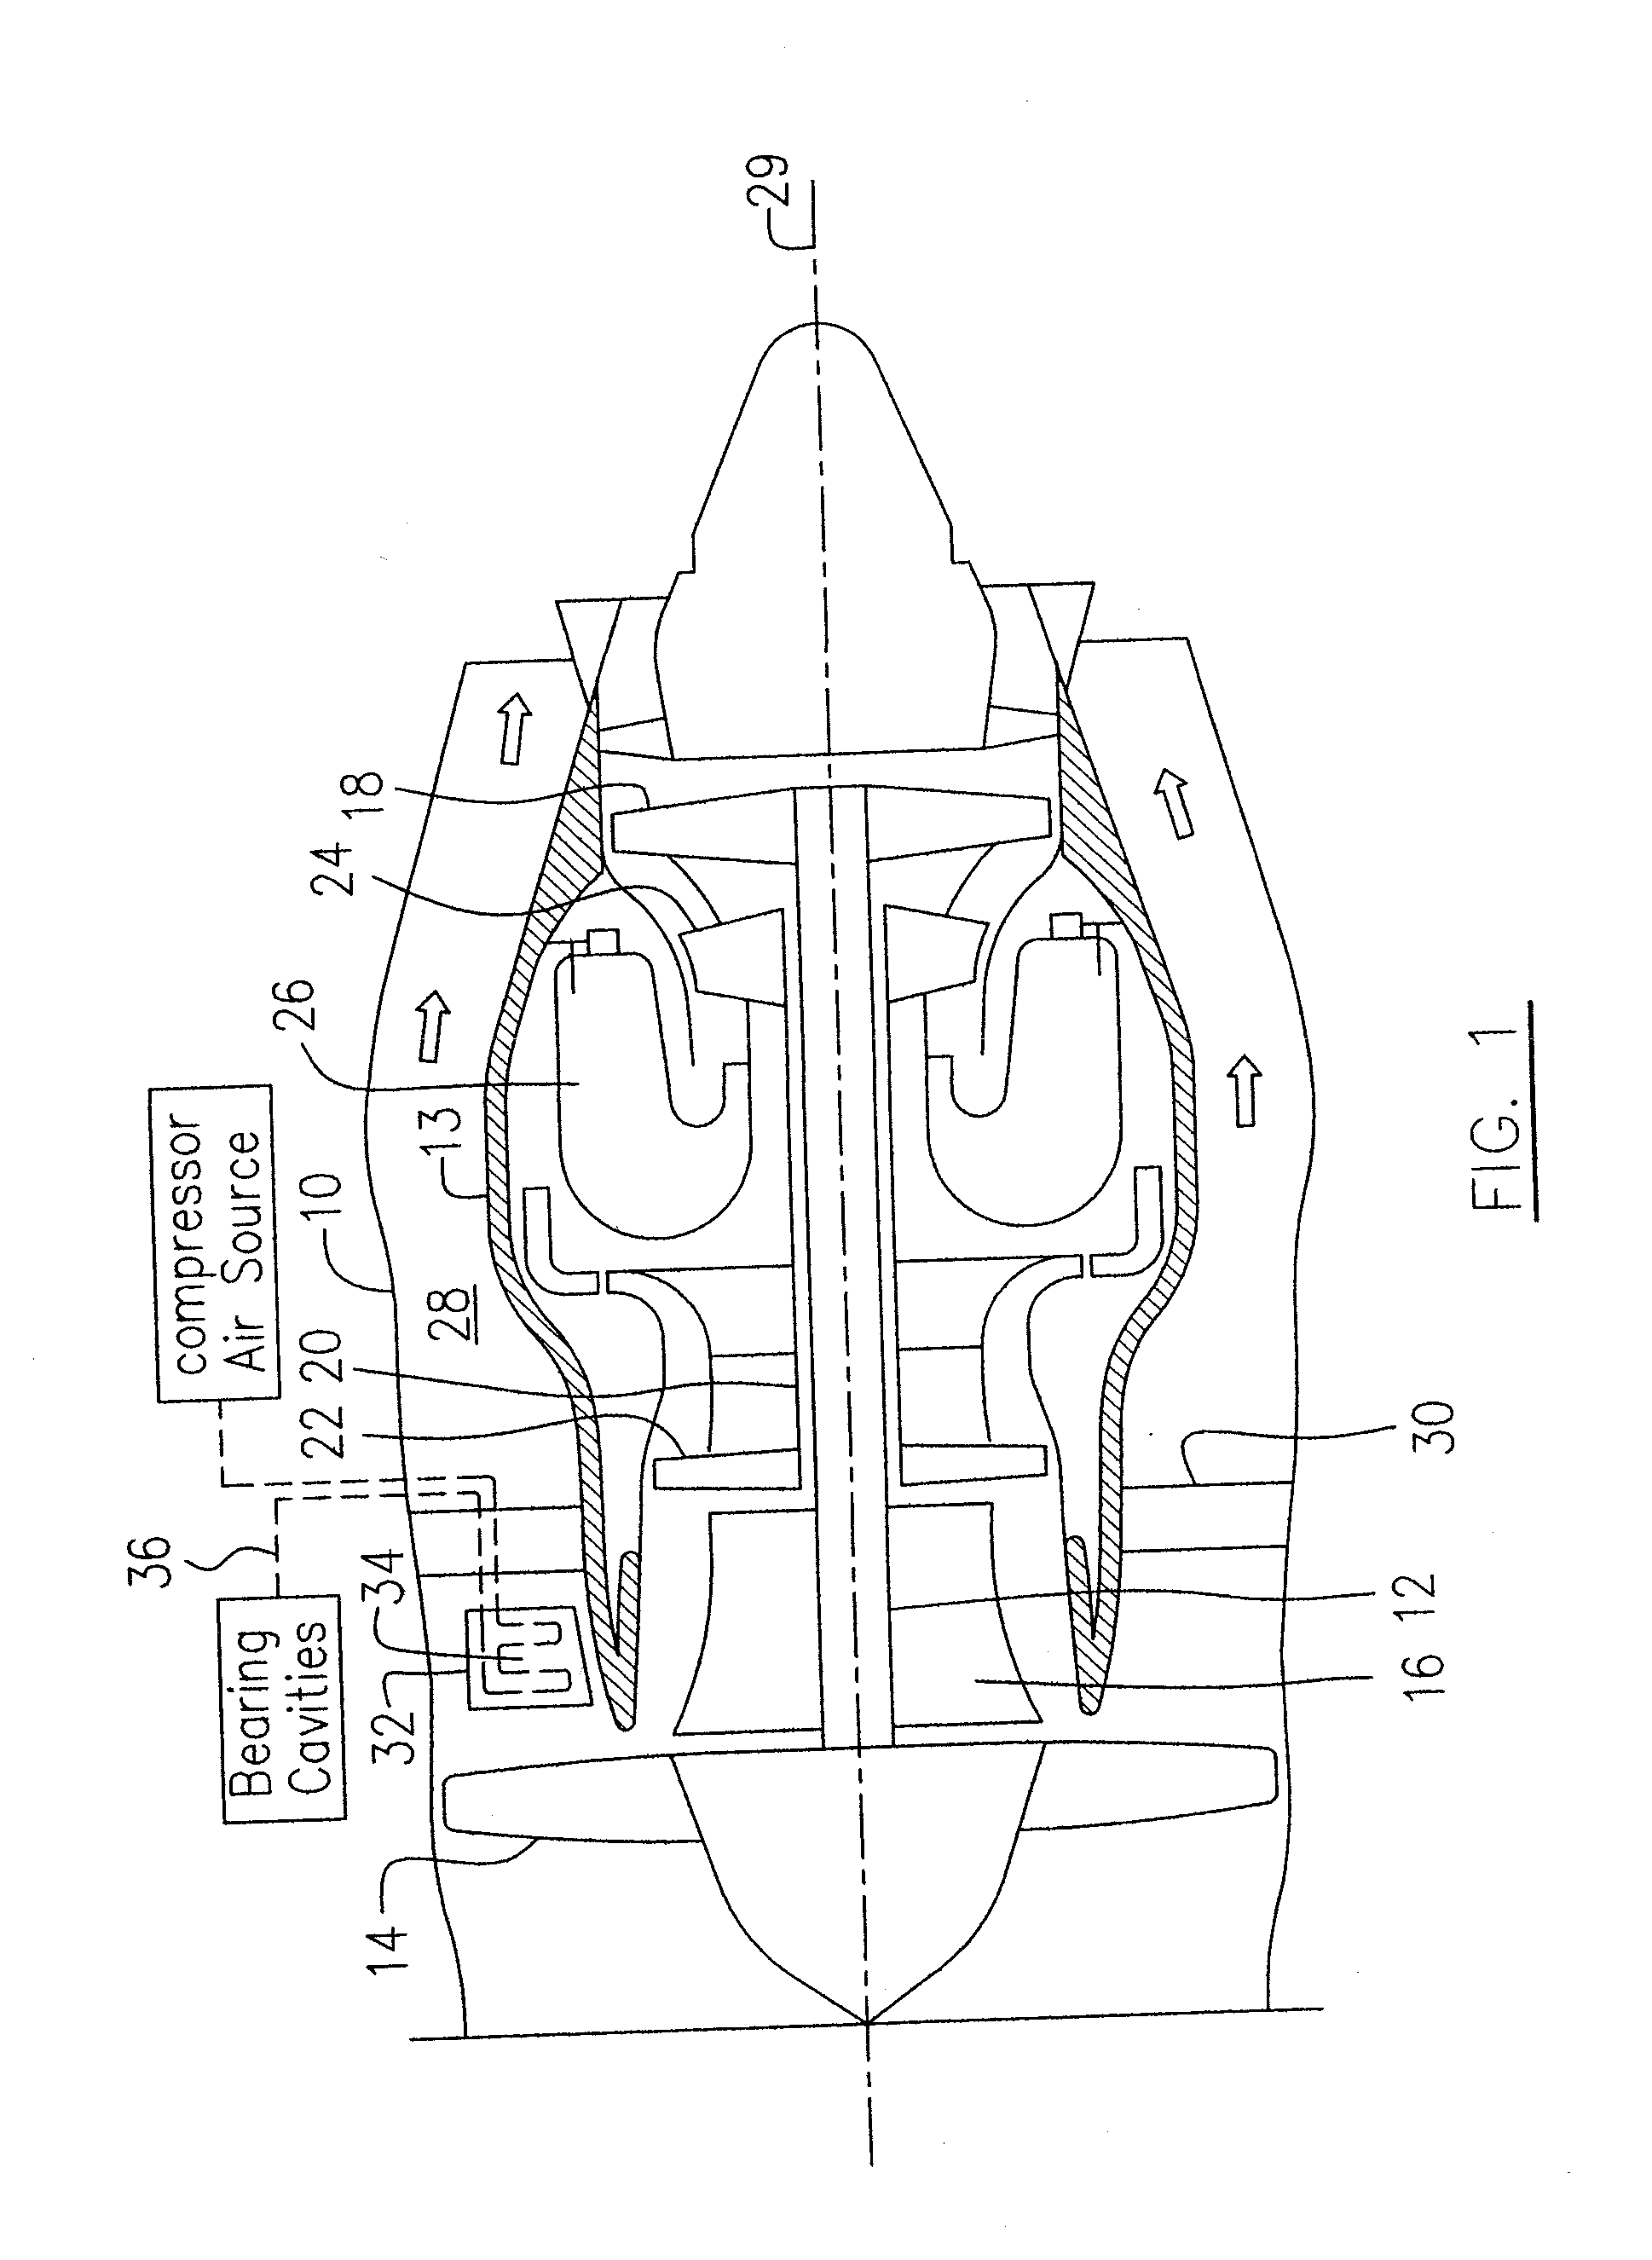 Air cooler system for gas turbine engines